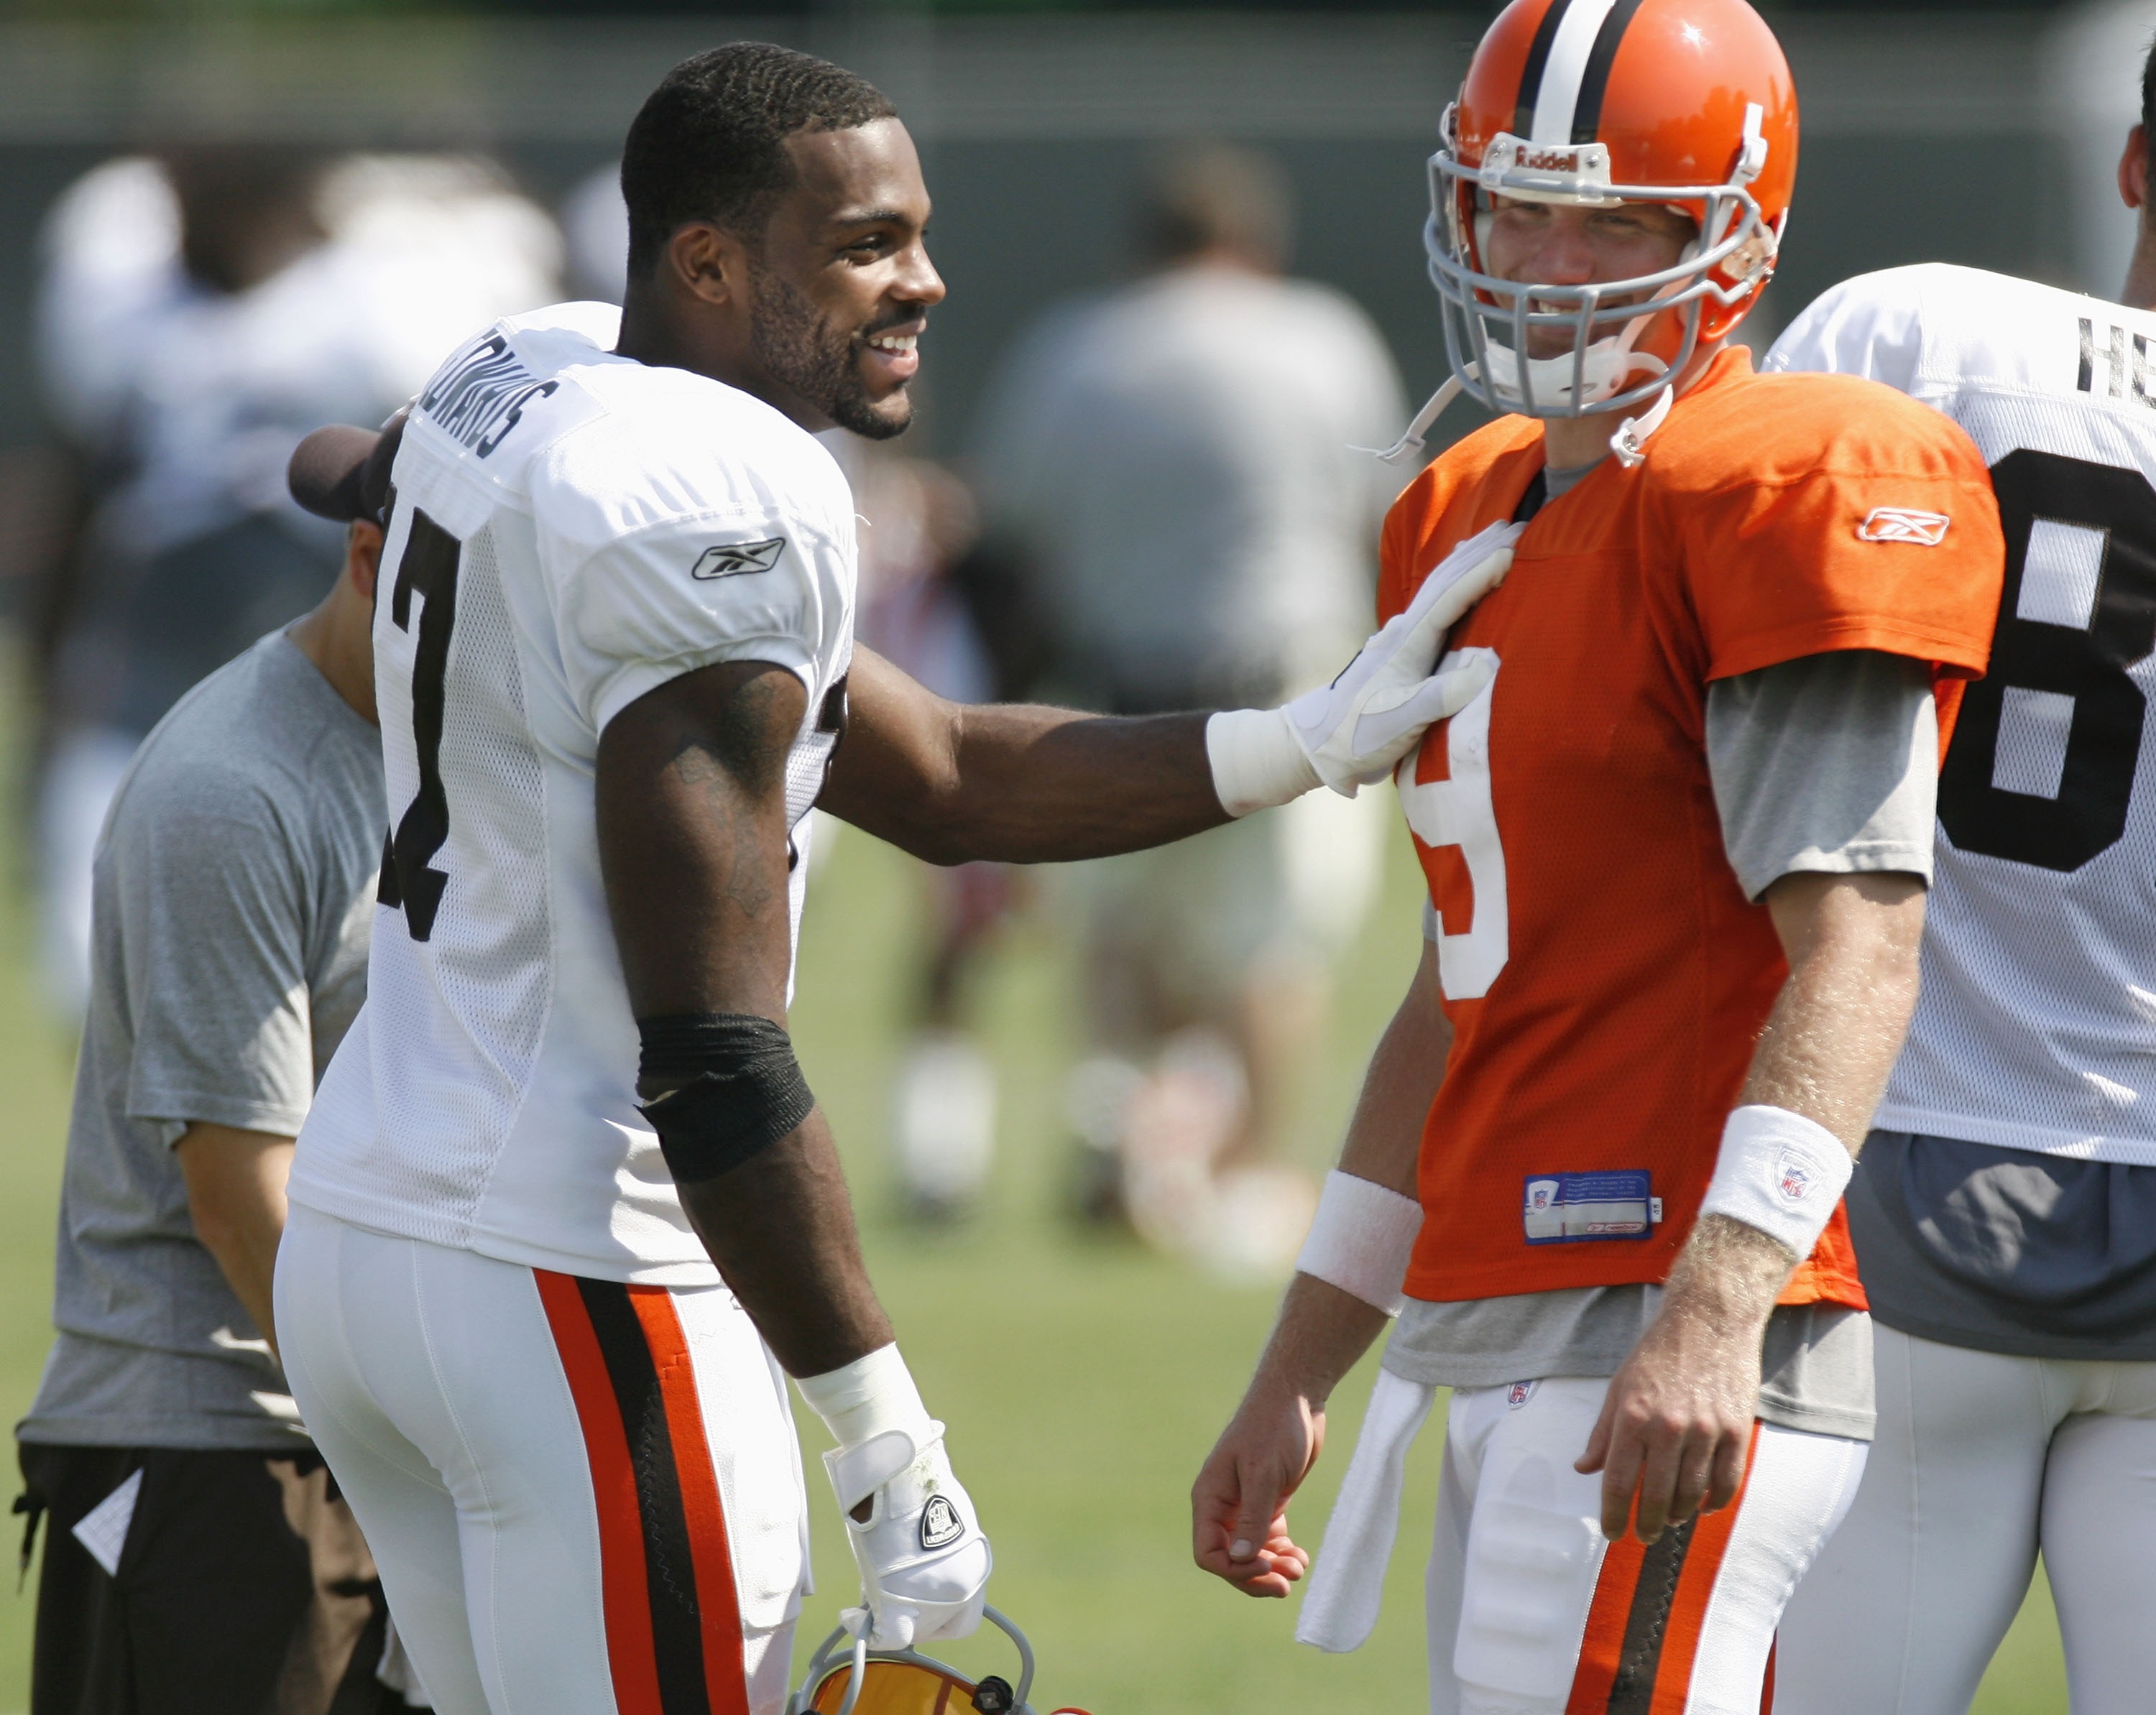 BEREA, OH - JULY 31:  Braylon Edwards #17 of the Cleveland Browns talks with Charlie Frye #9 during a training camp at the Cleveland Browns Training and Administrative Complex on July 31, 2007 in Berea, Ohio. (Photo By Gregory Shamus/Getty Images)